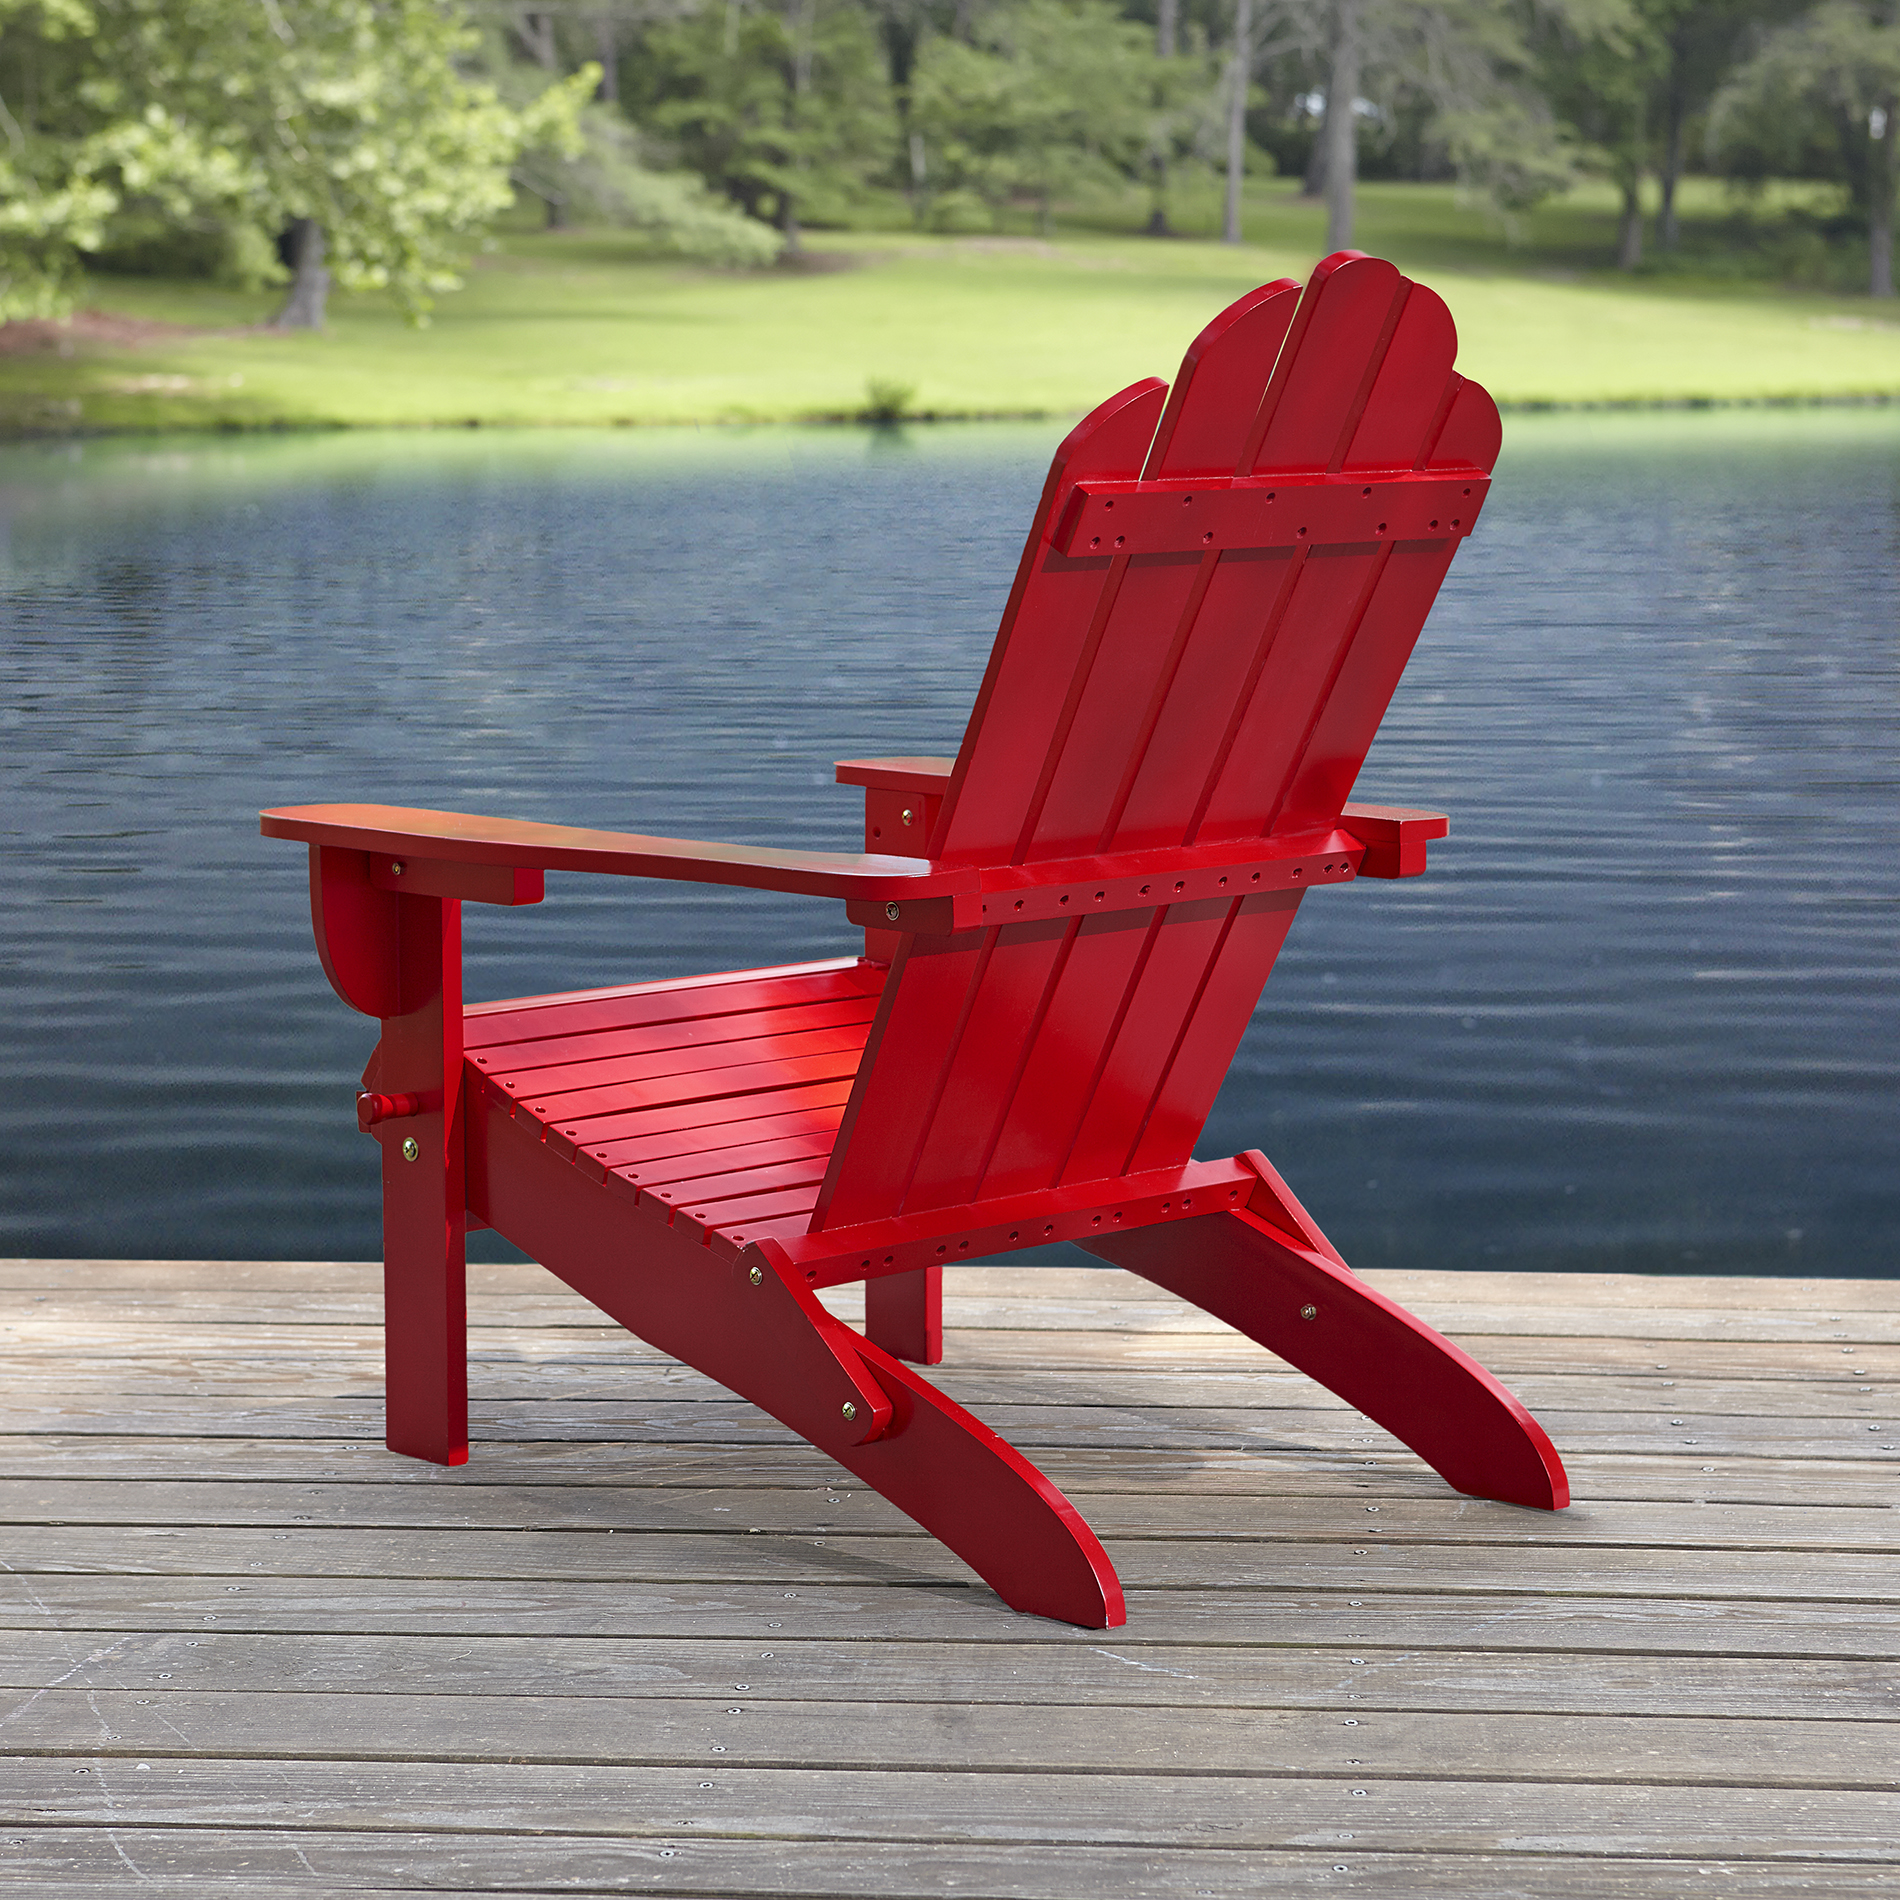 Garden Oasis Adirondack Chair Red Free Shipping New eBay